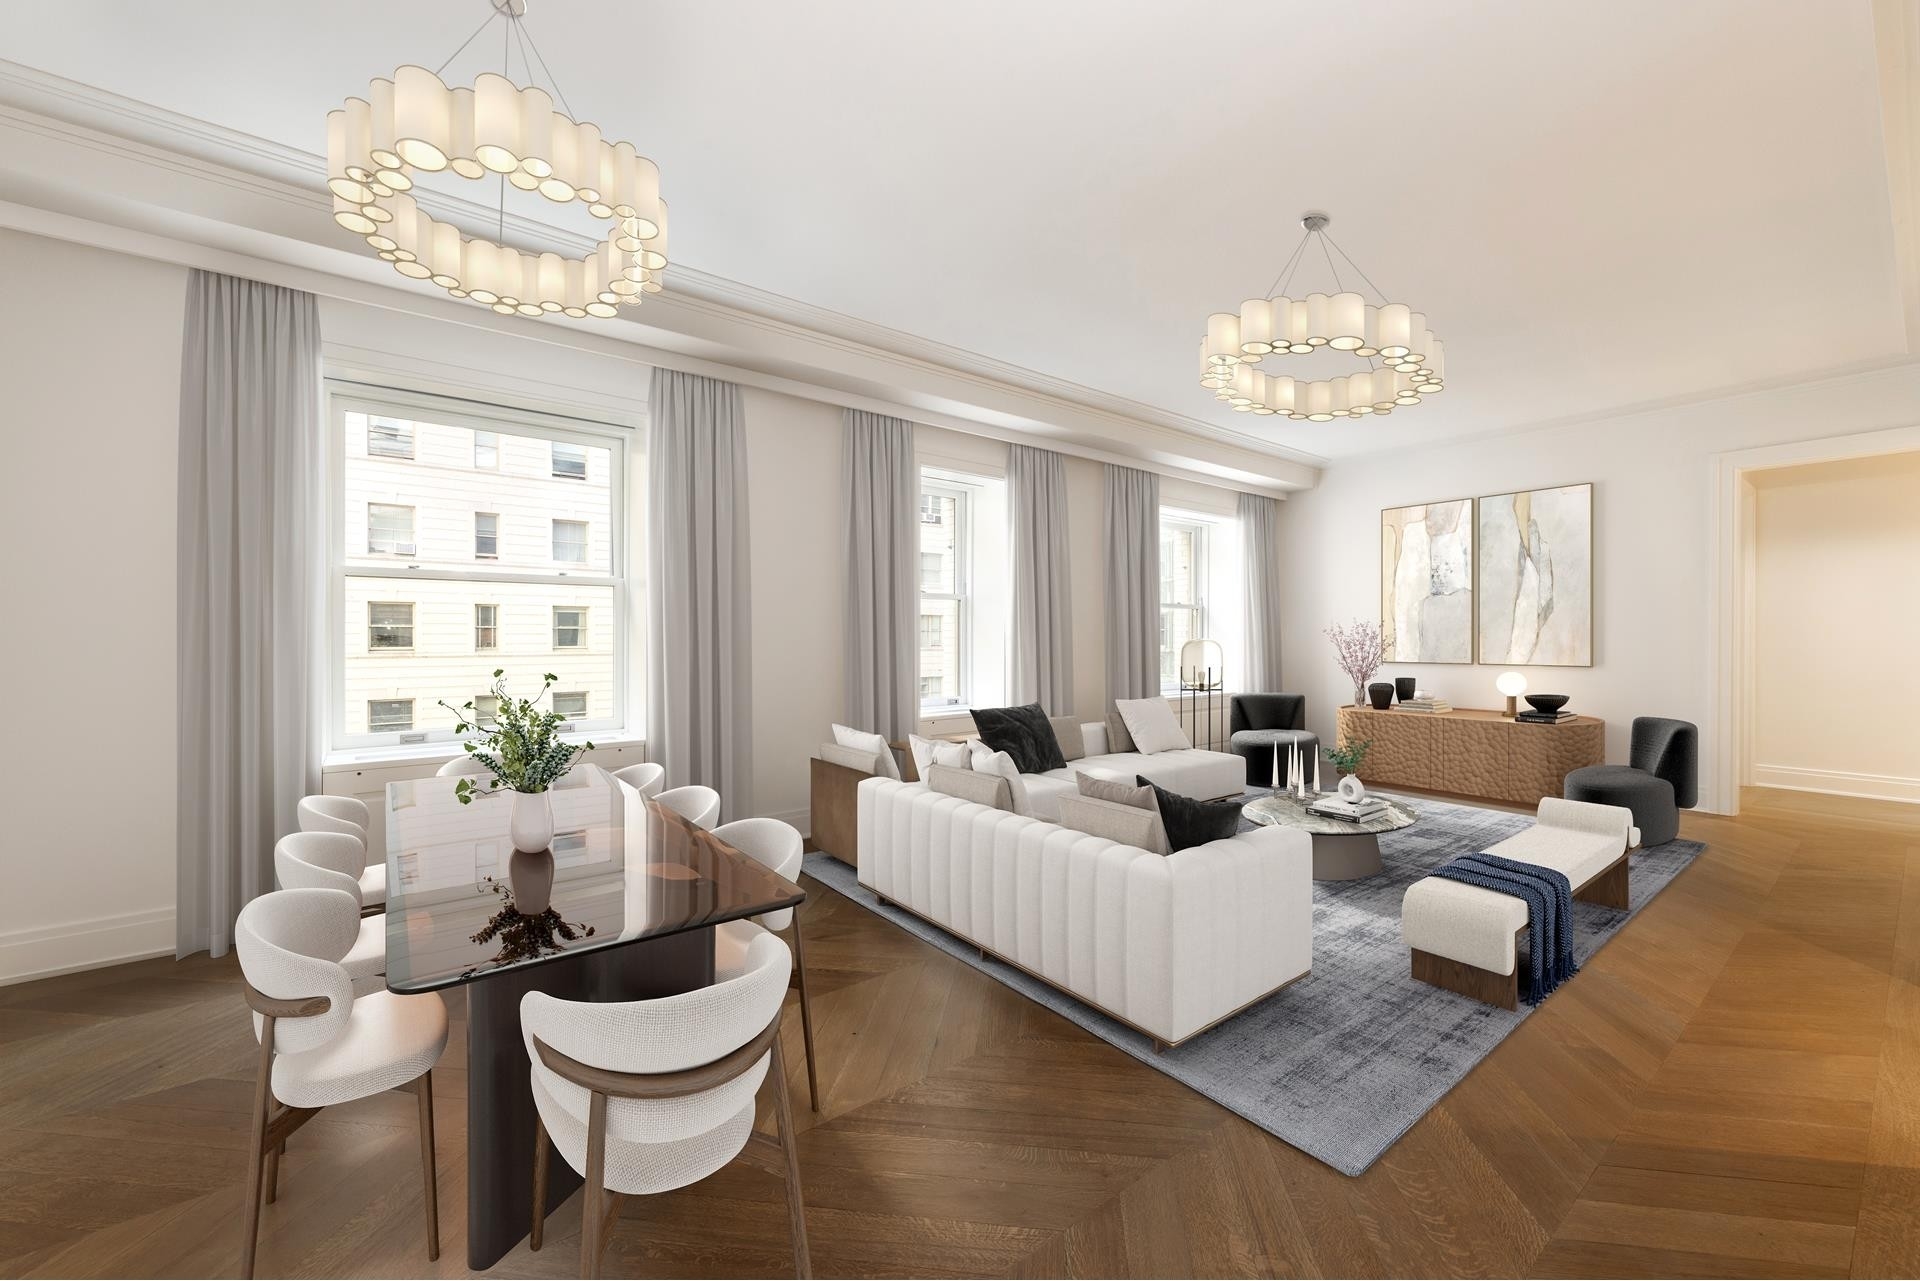 Condominium for Sale at The Belnord, 225 W 86TH ST, 412 Upper West Side, New York, New York 10024